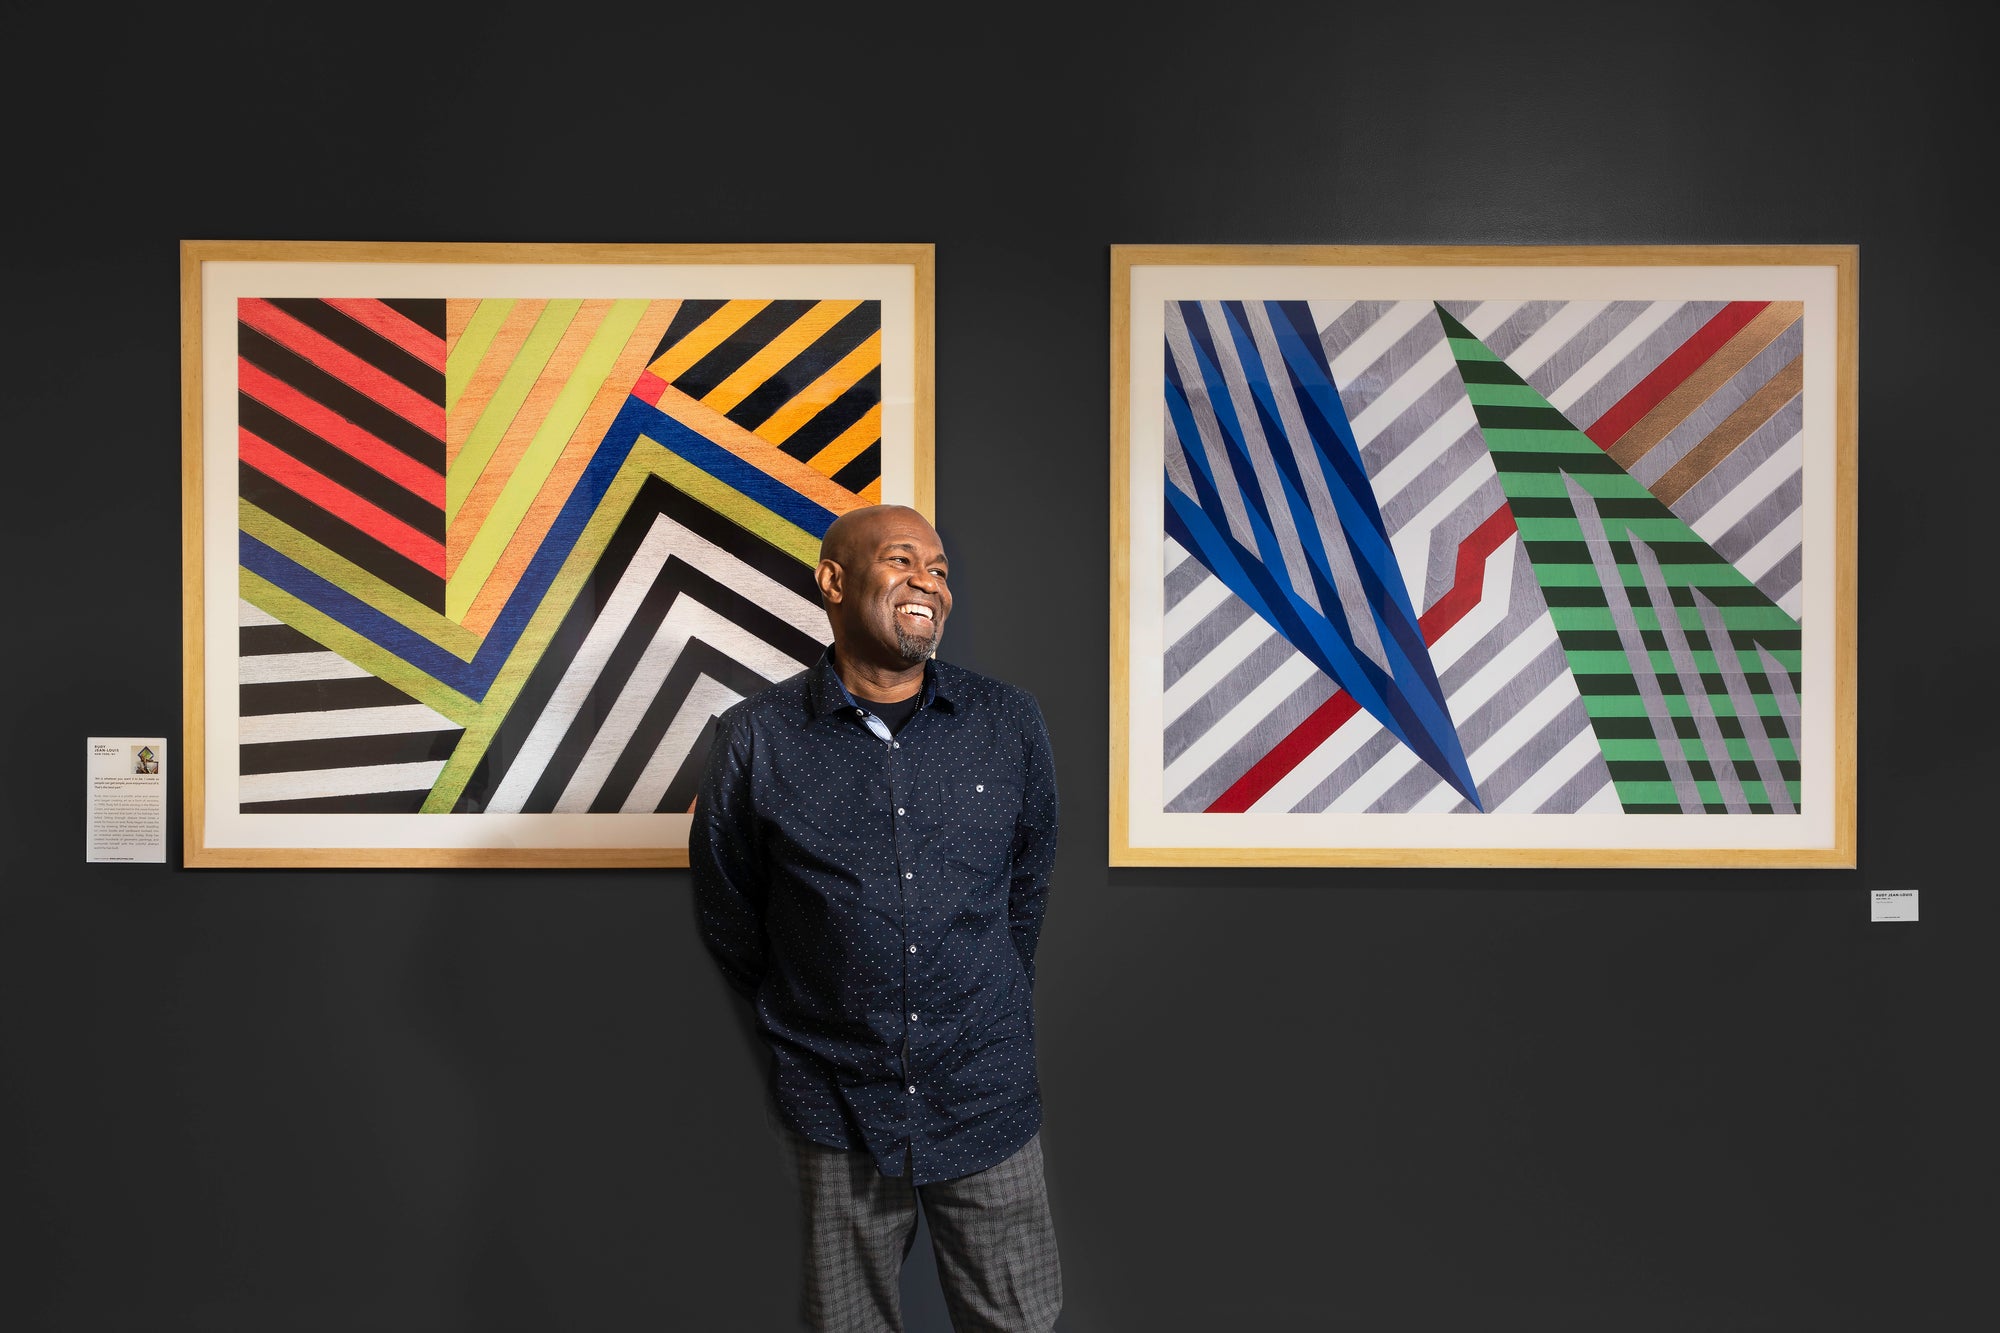 ArtLifting local artist Rudolph Jean-Lous stands in front of his artwork at a Bank of America financial center in New York.